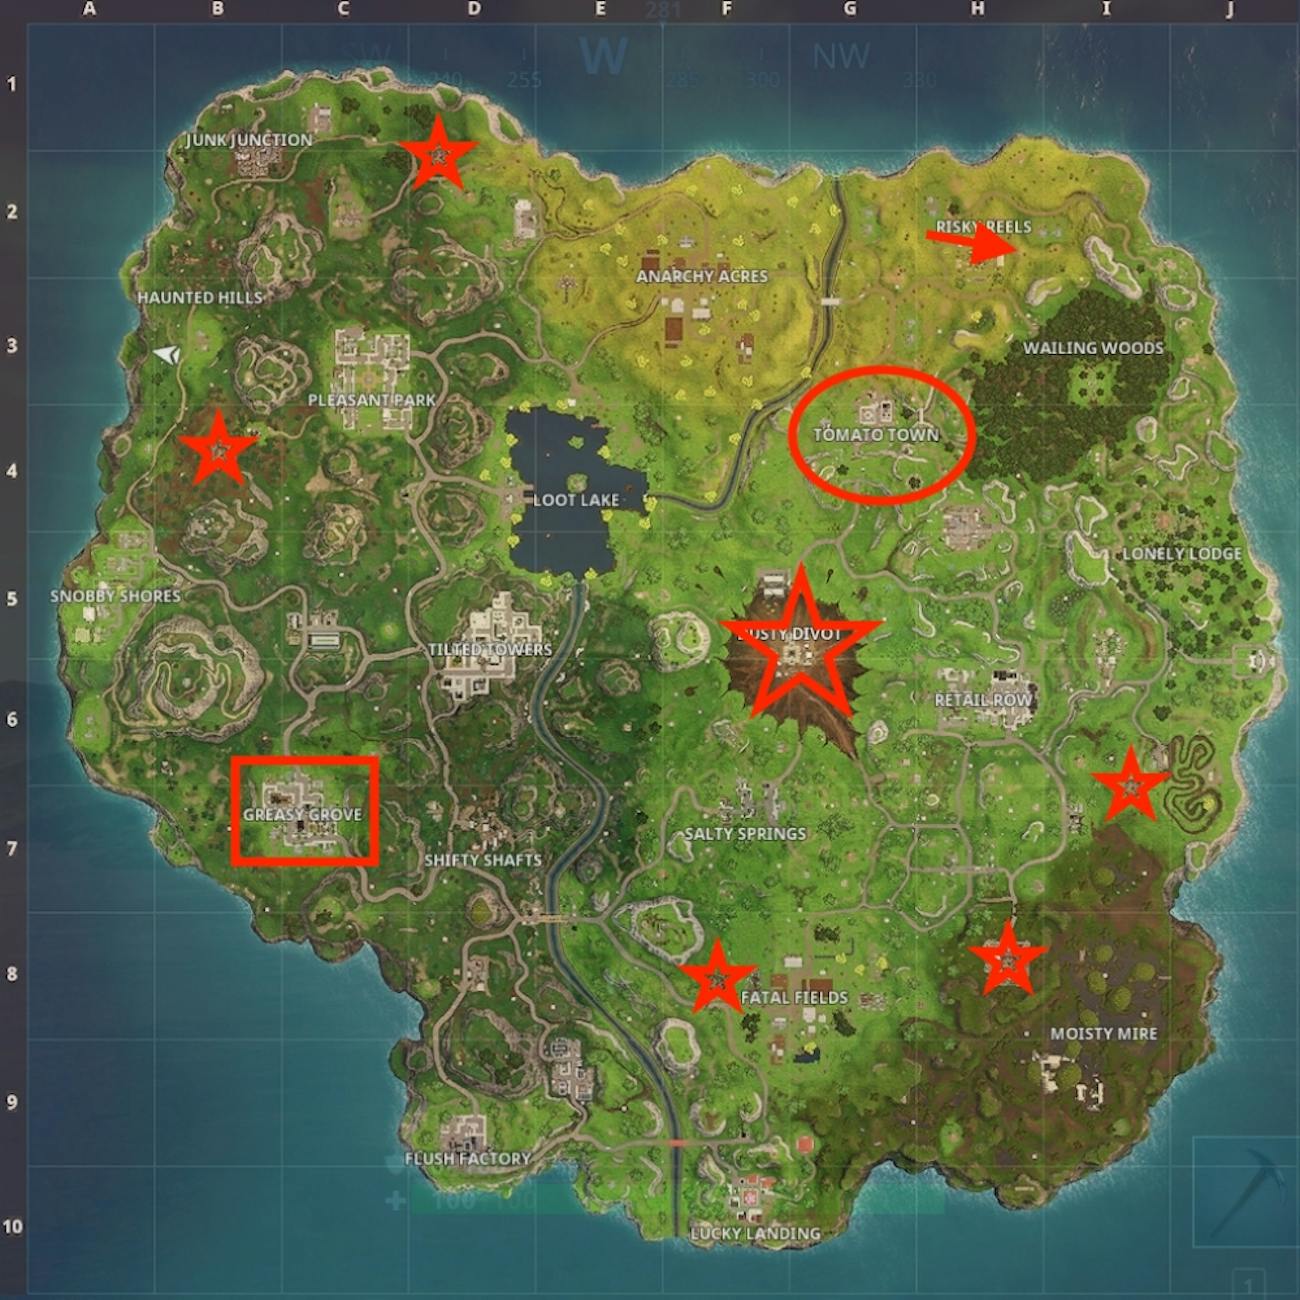 the starred locations have hop rocks and the other red shapes indicate similarly important locations - fortnite greasy grove season 7